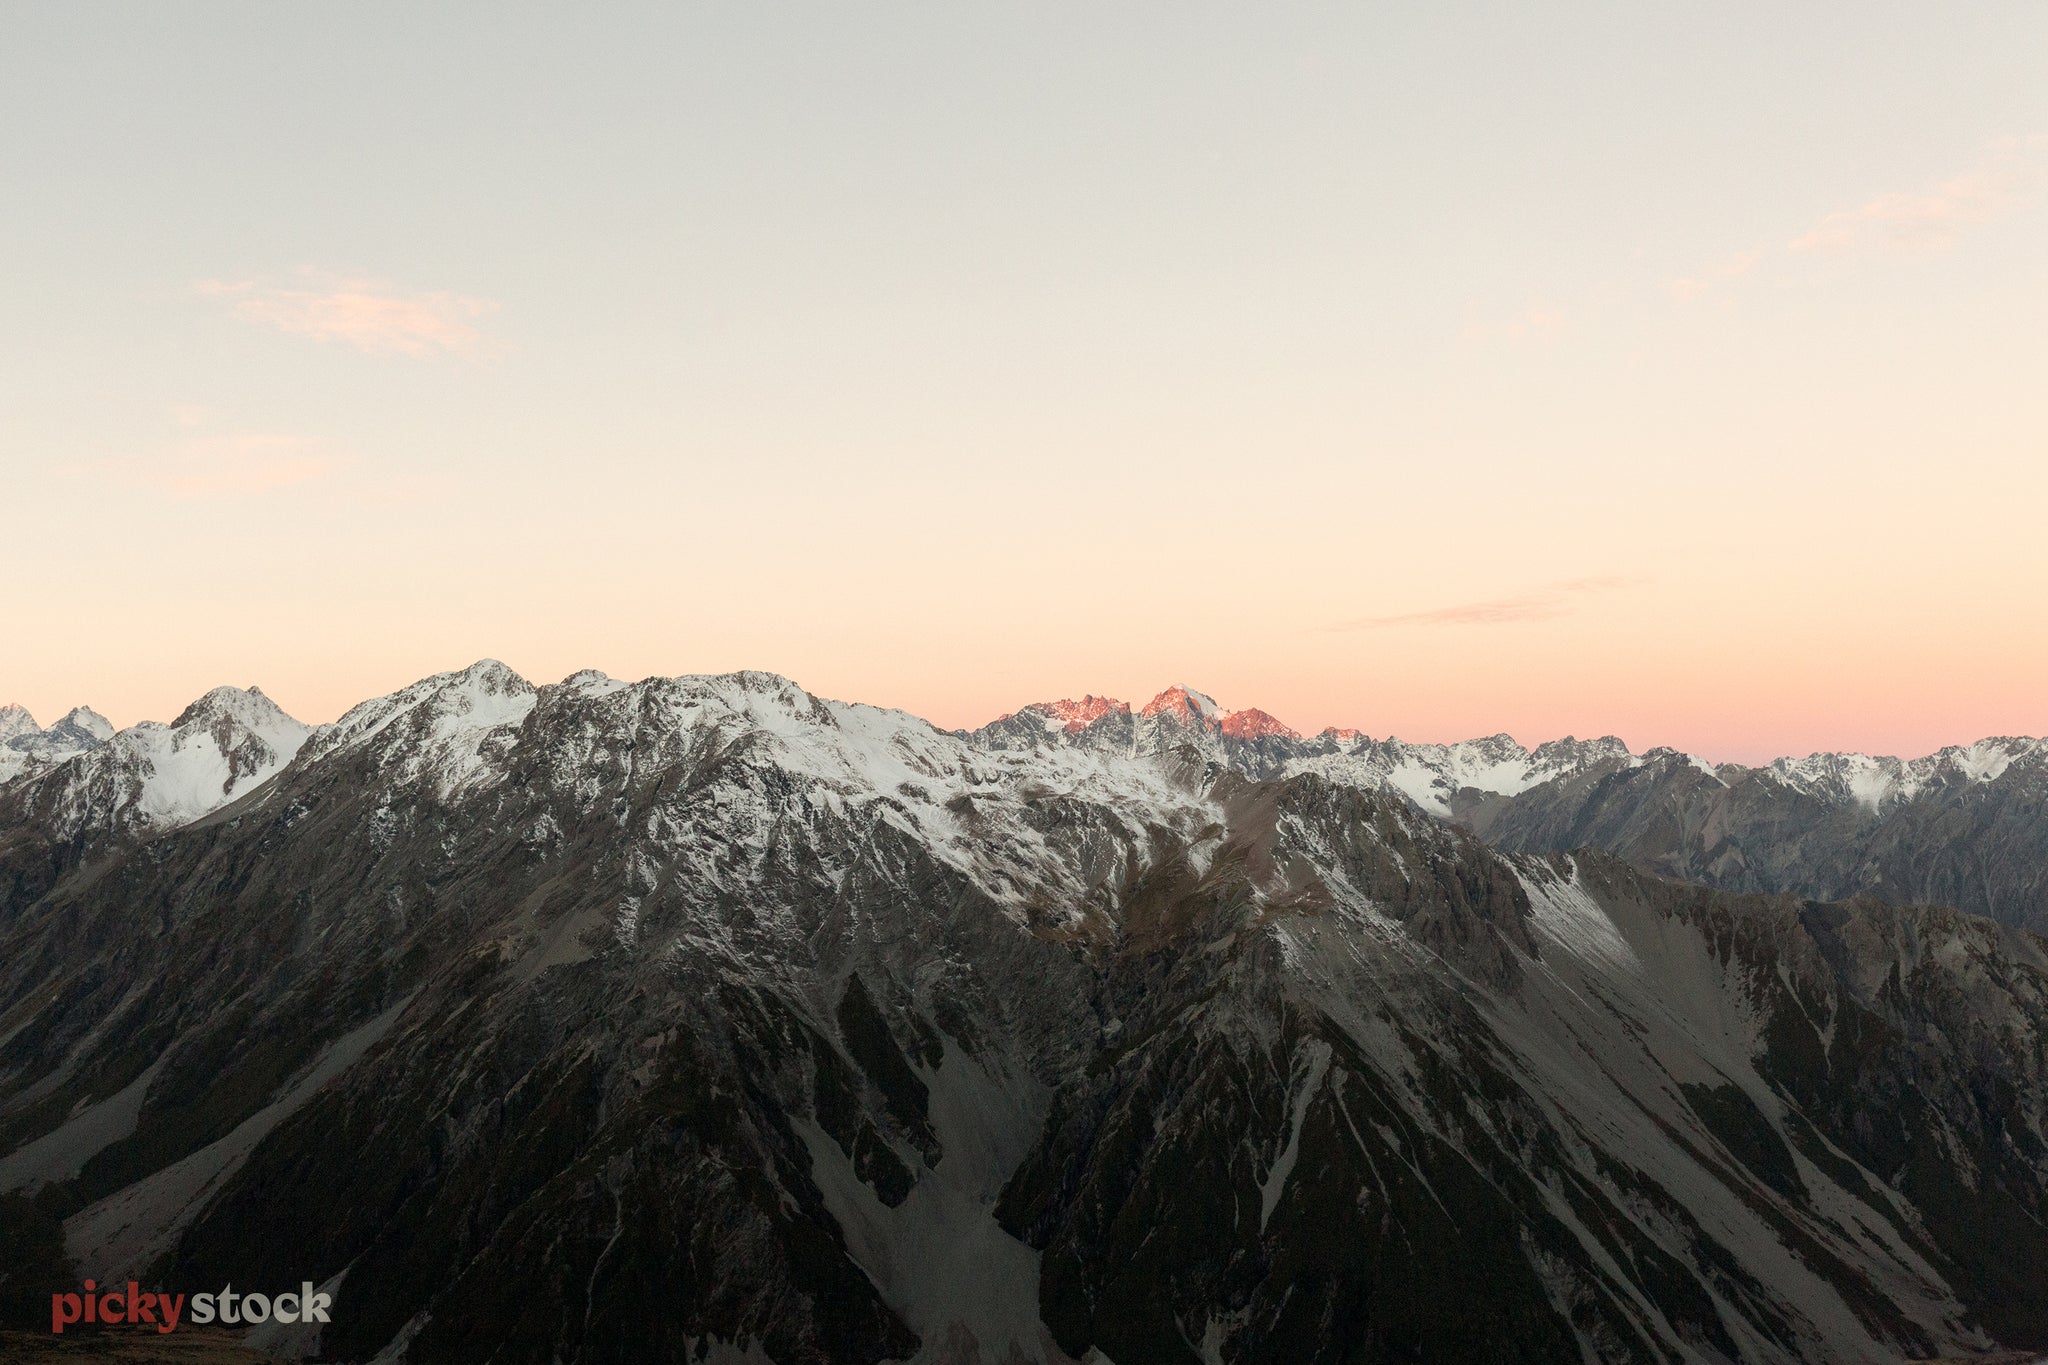 Looking out over the Mount Cook mountain range, just snow capped at the top, with the sheer mountain revealed beneath. The dusky pink light of sunset reflected in the snow. 